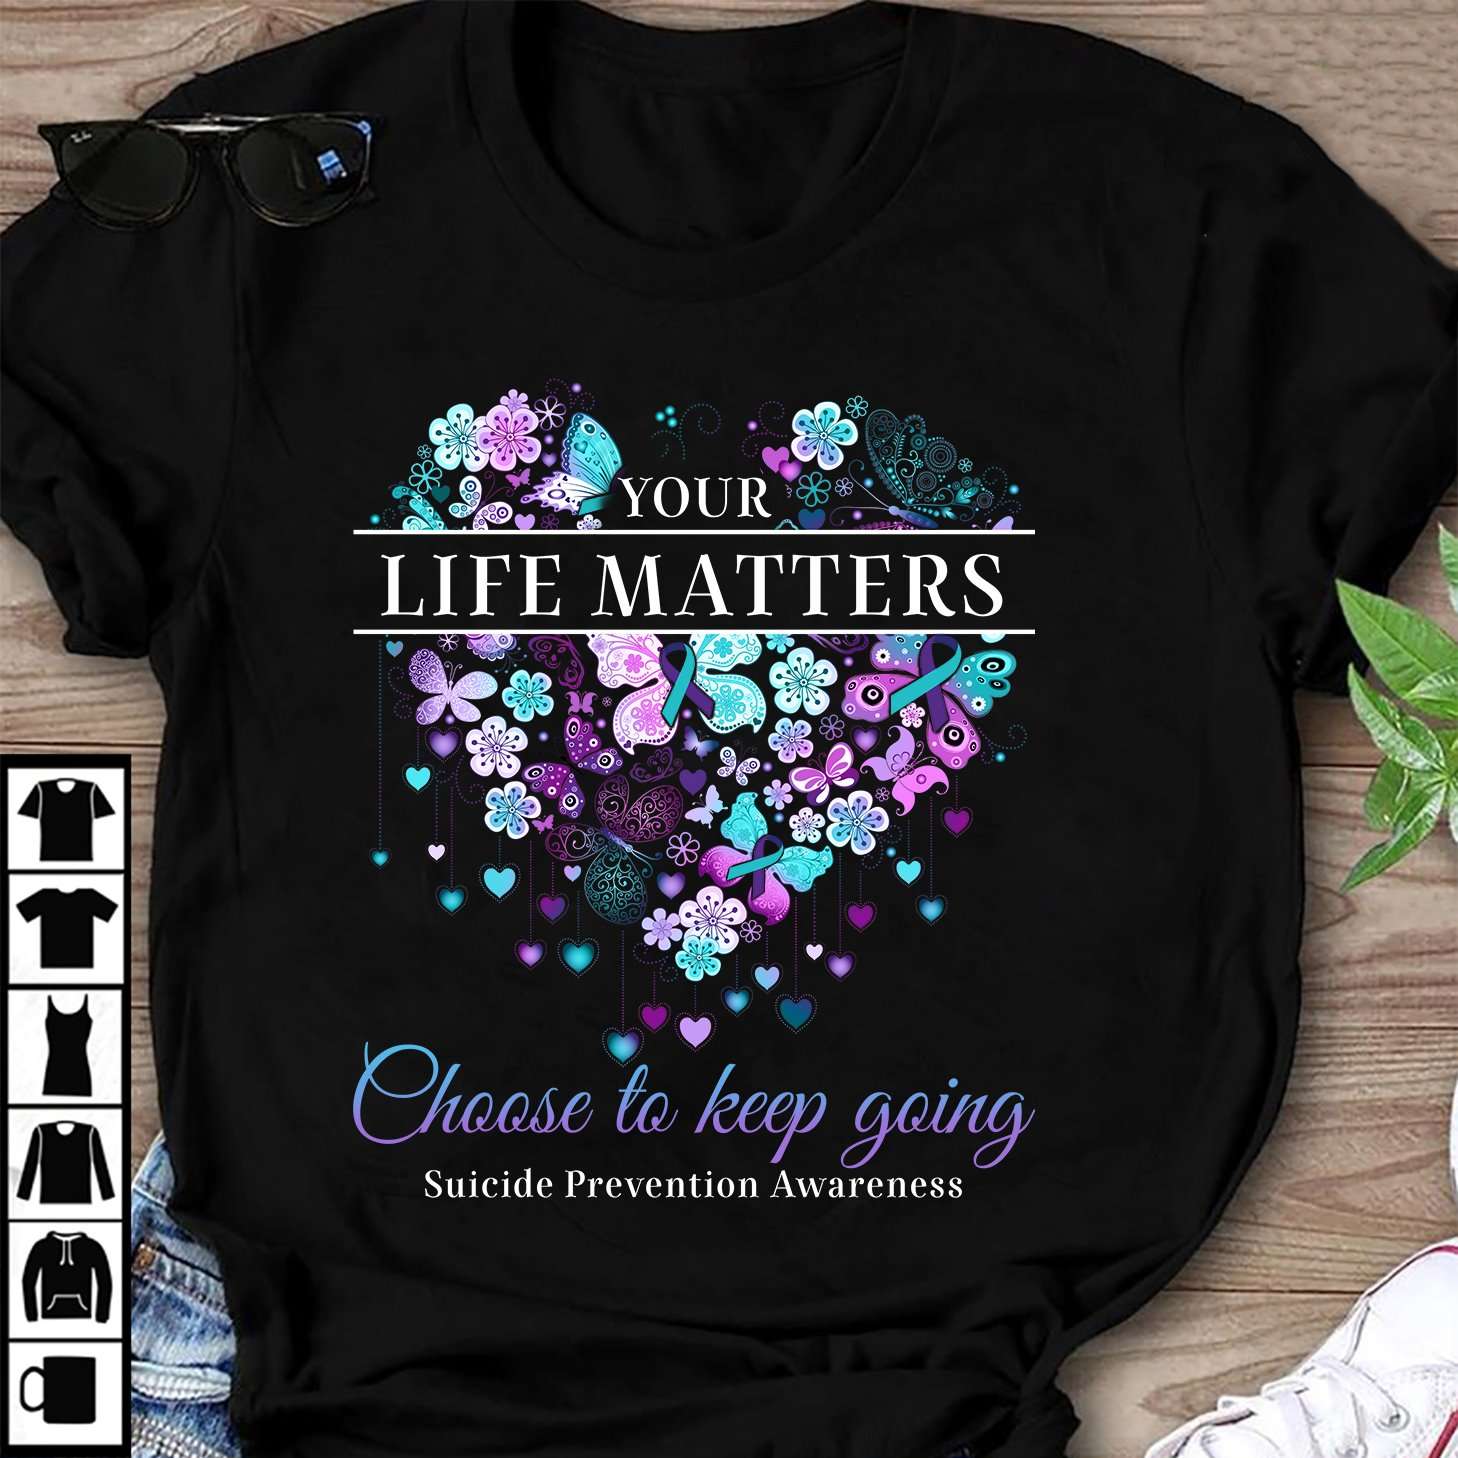 Your life matters - Choose to keep going, suicide prevention awareness